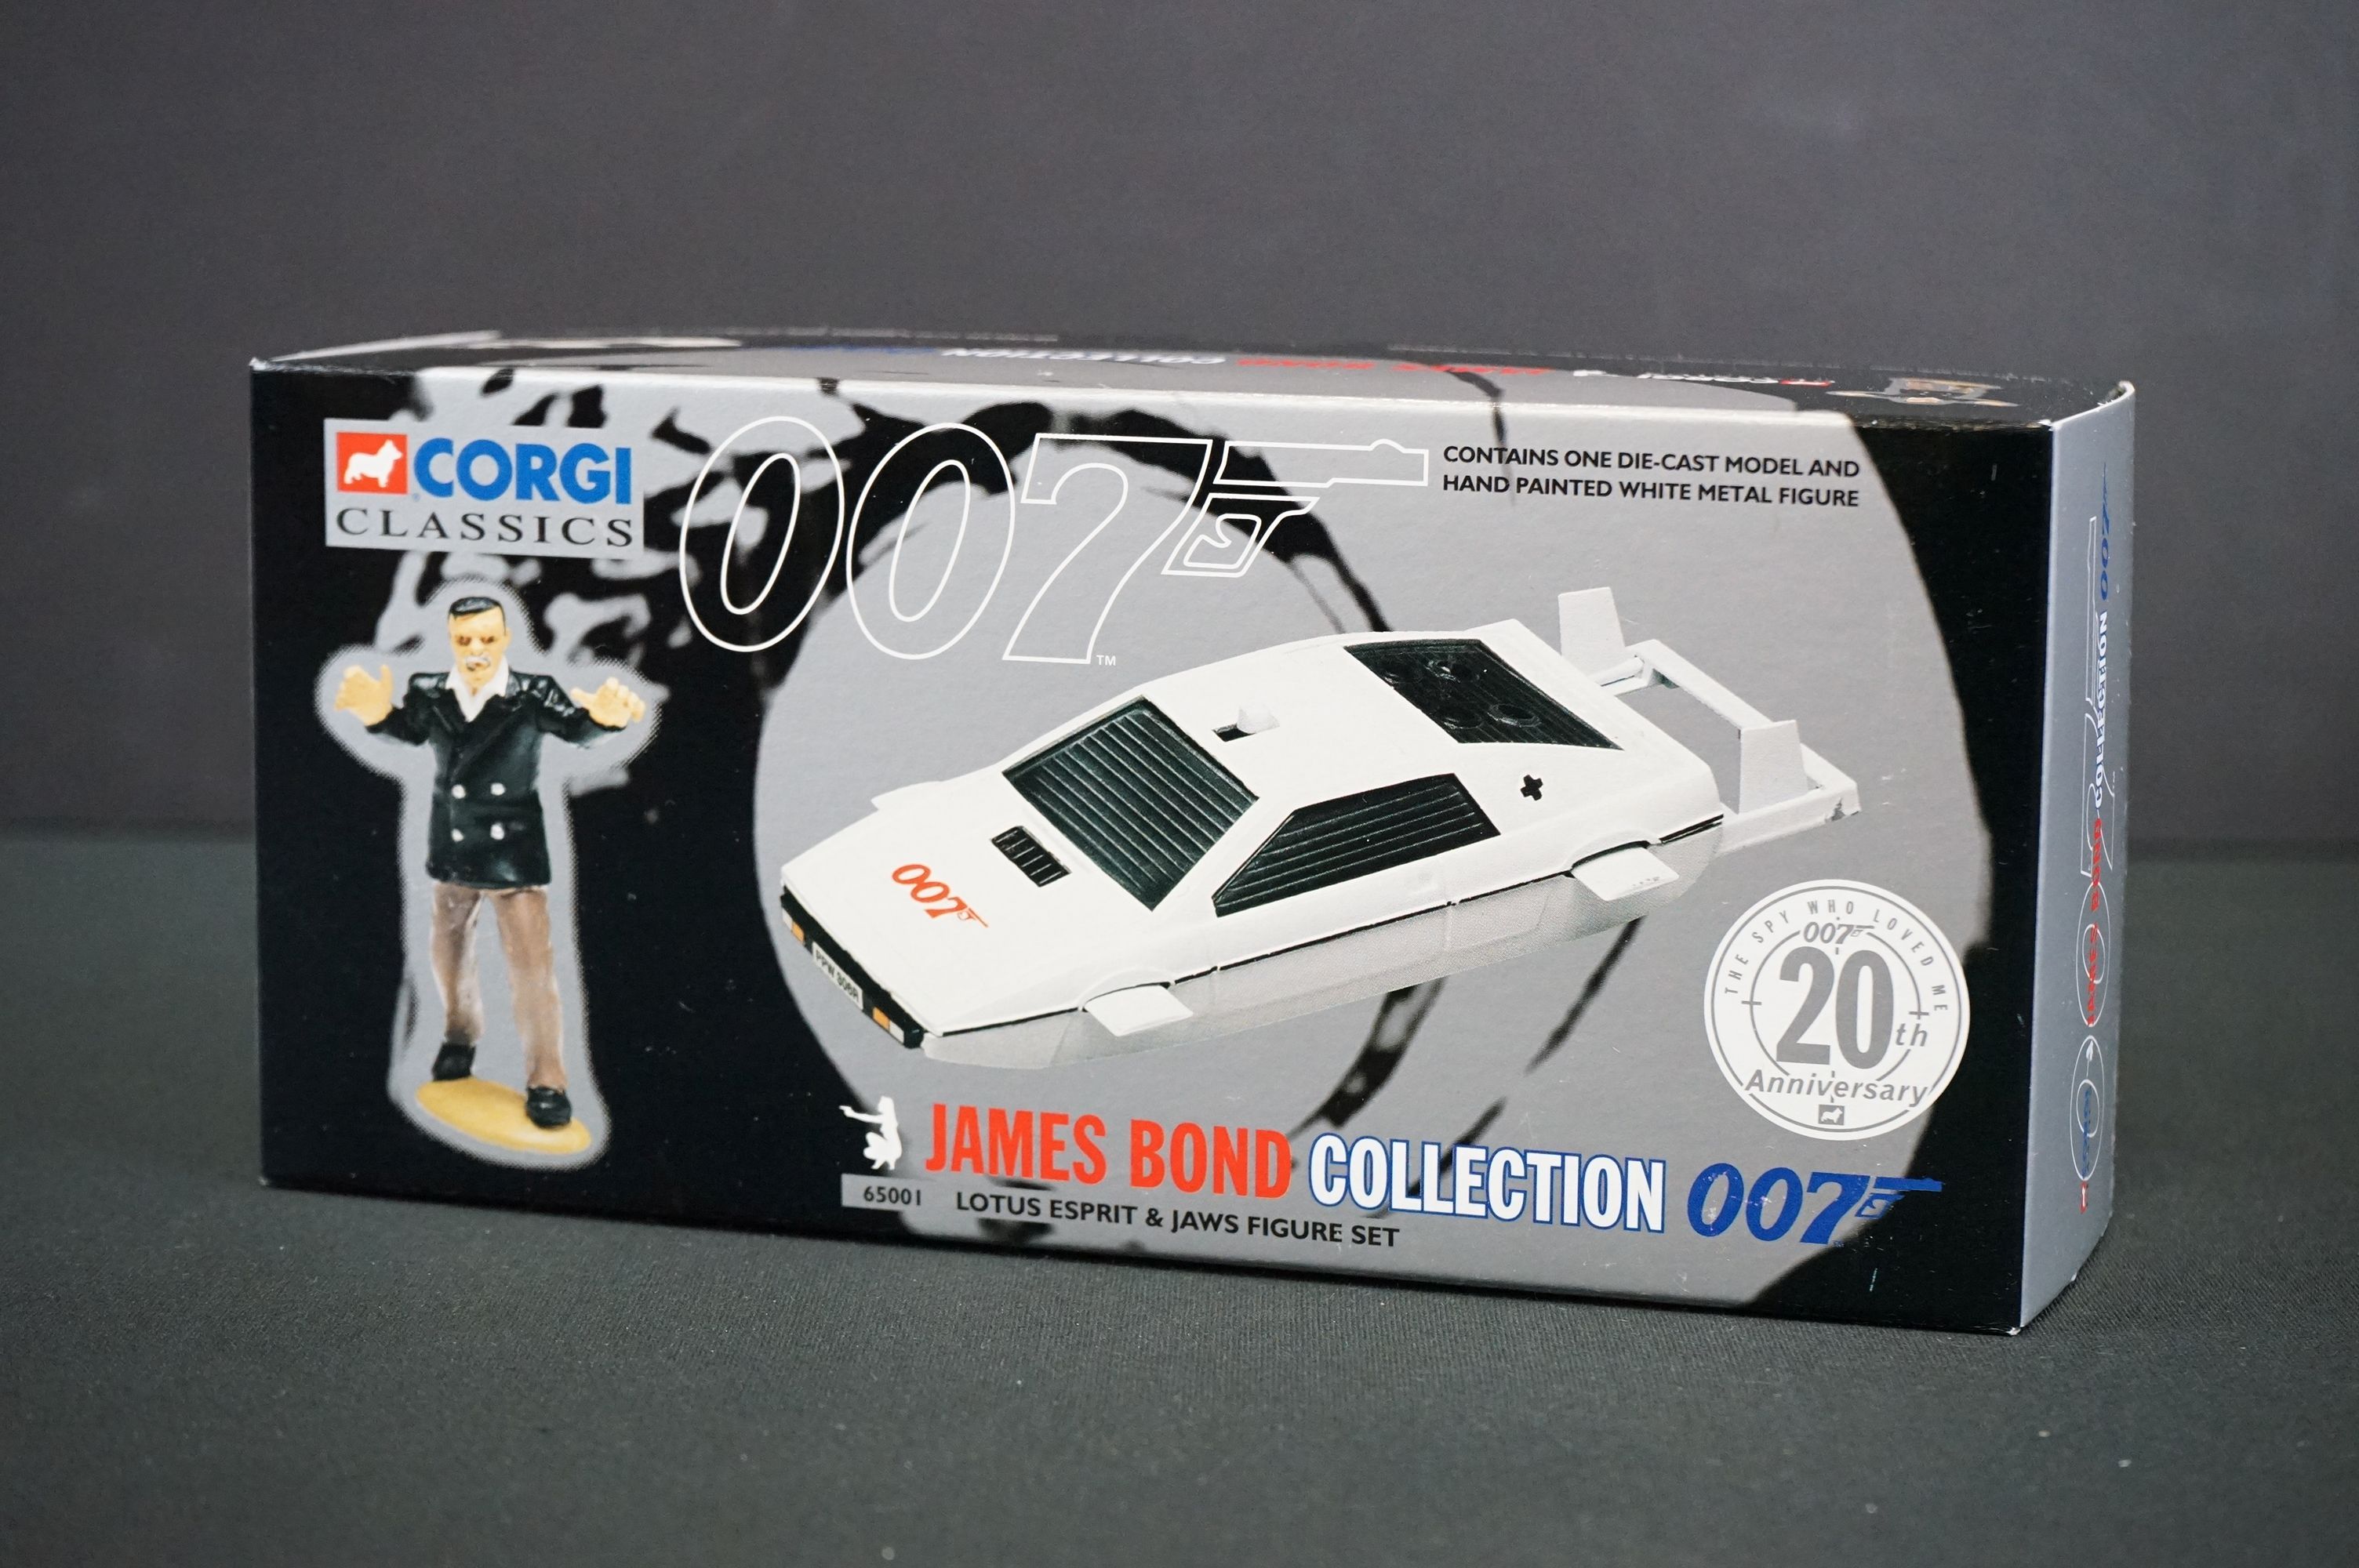 Seven boxed Corgi Classics James Bond Collection diecast model sets to include 65201, 65301, - Image 7 of 8